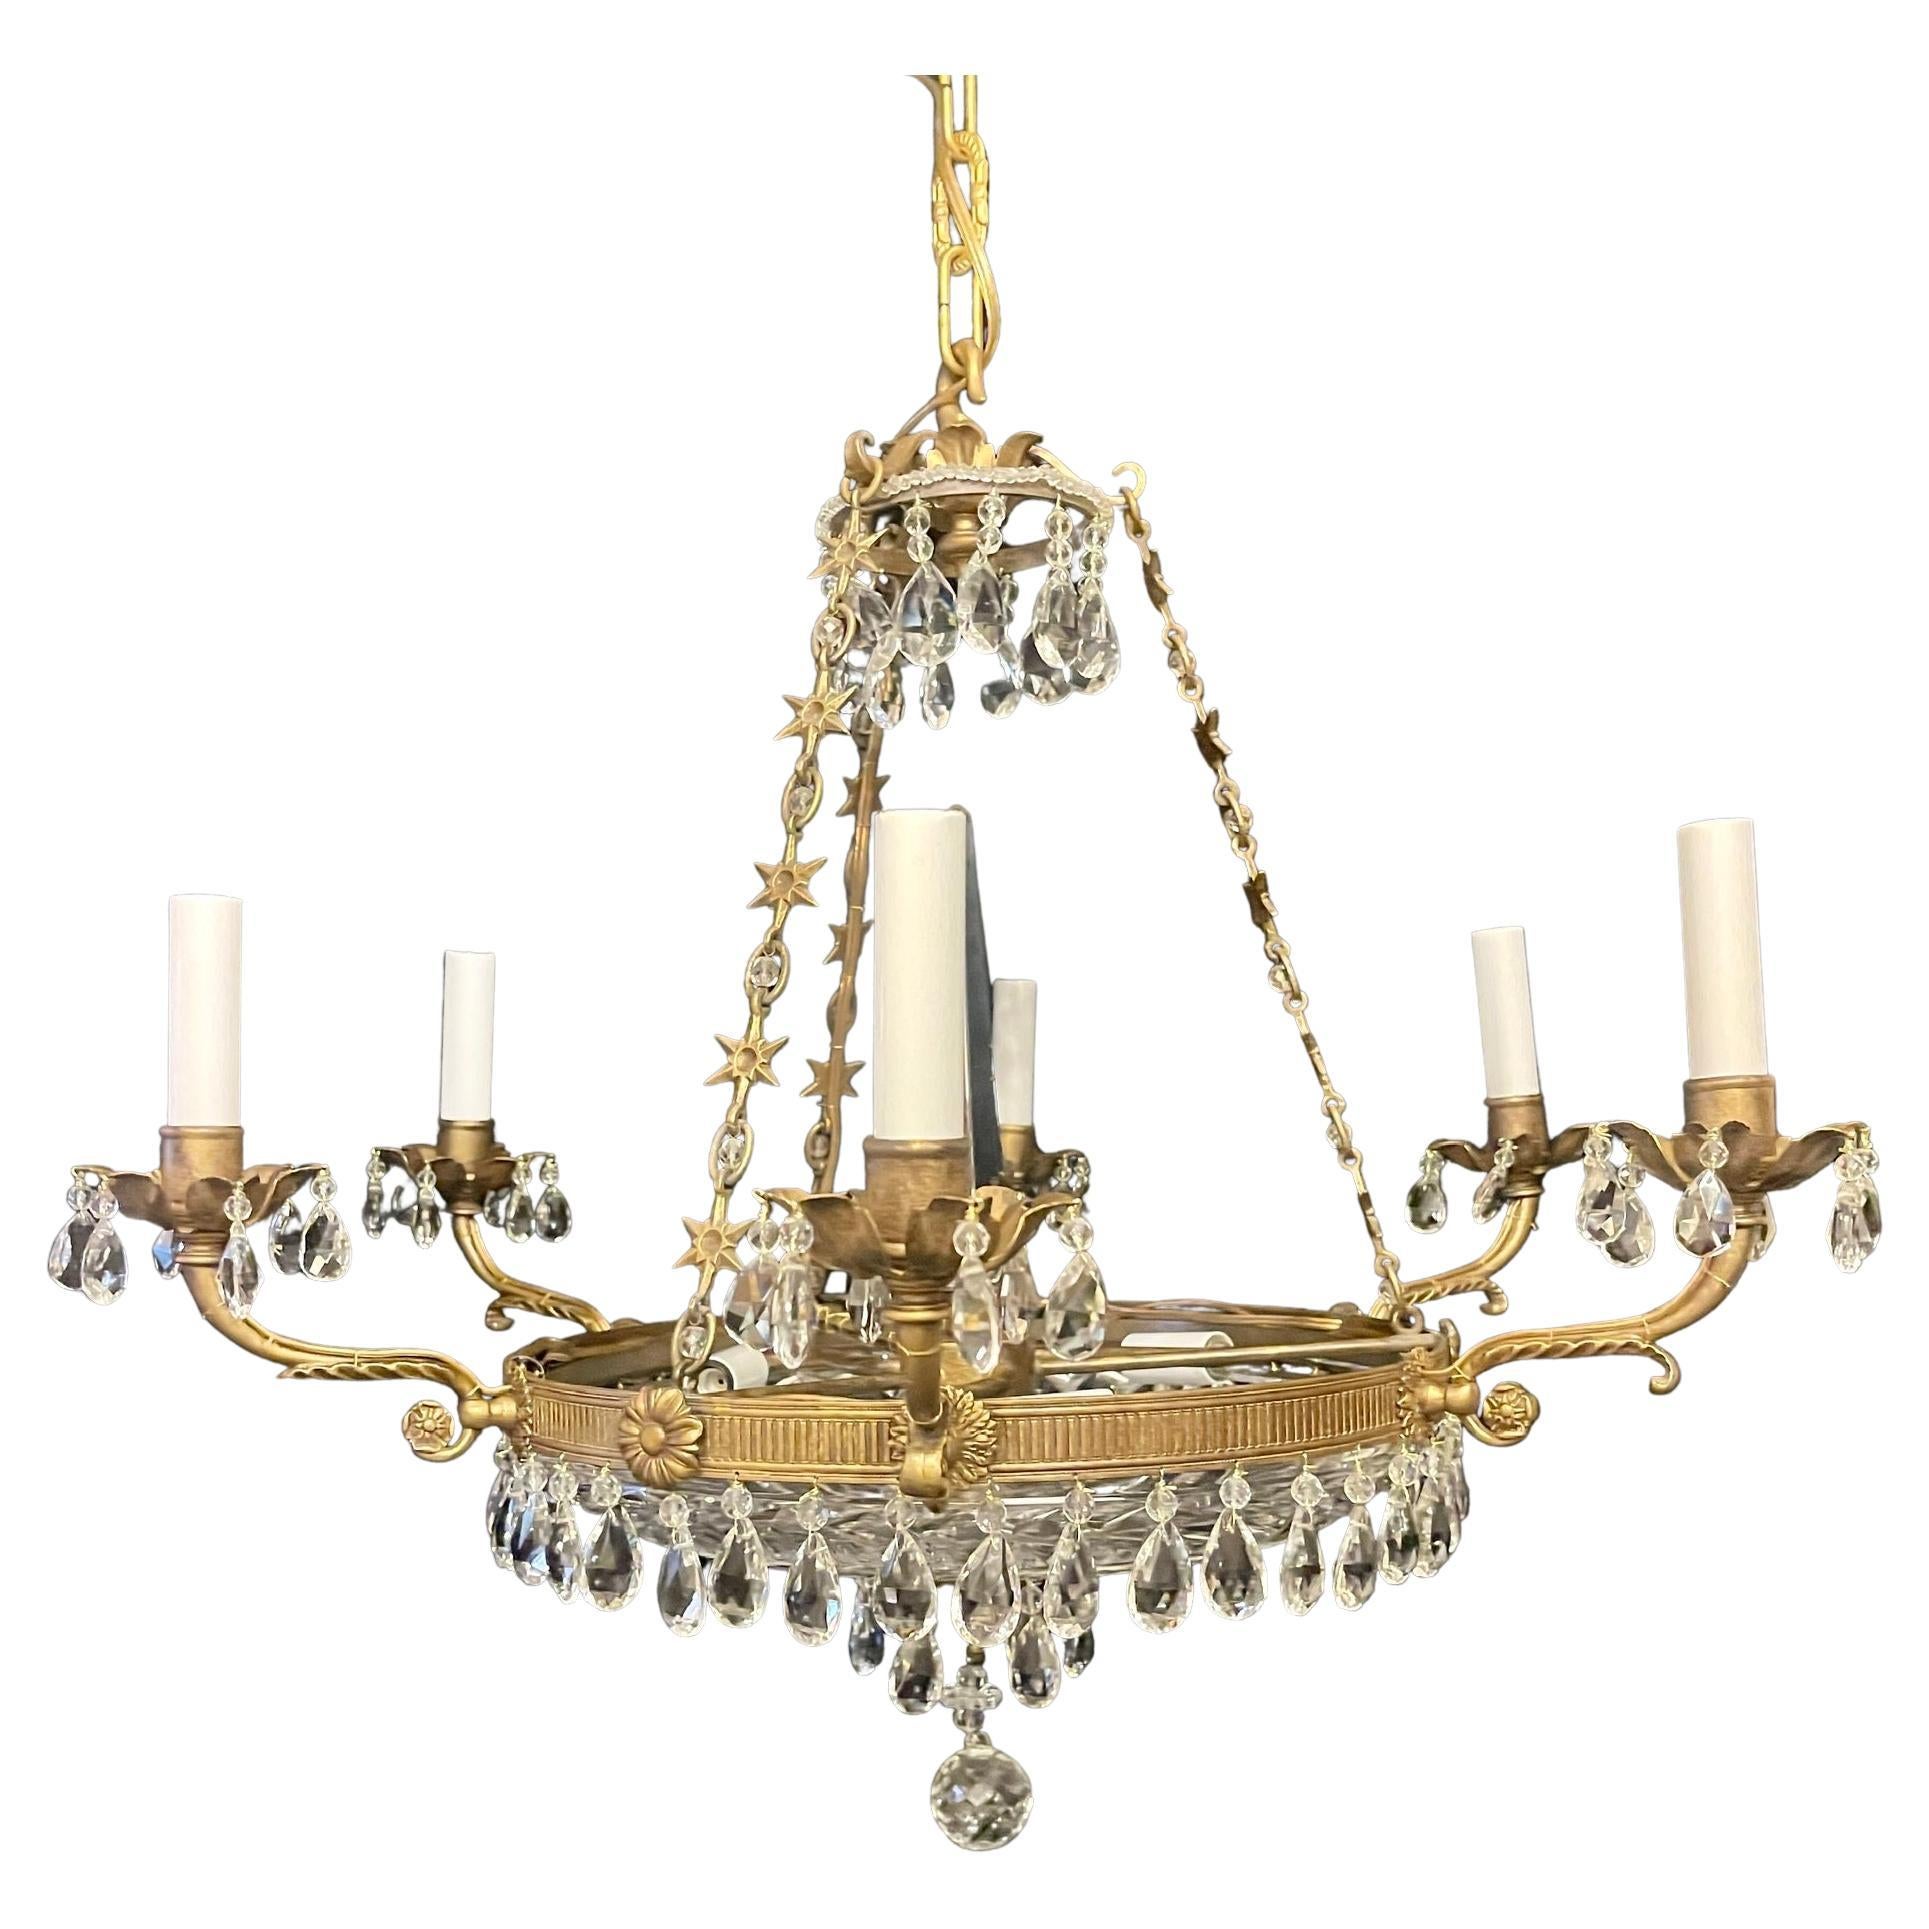 A Wonderful French Gilt Bronze Neoclassical / Baltic Six Candelabra Light Chandelier With Cut Crystal Center Bowl Having Three Internal Lights.
This Beautiful Fixture Has Been Completely Rewired With New Sockets And Comes With Chain Canopy And